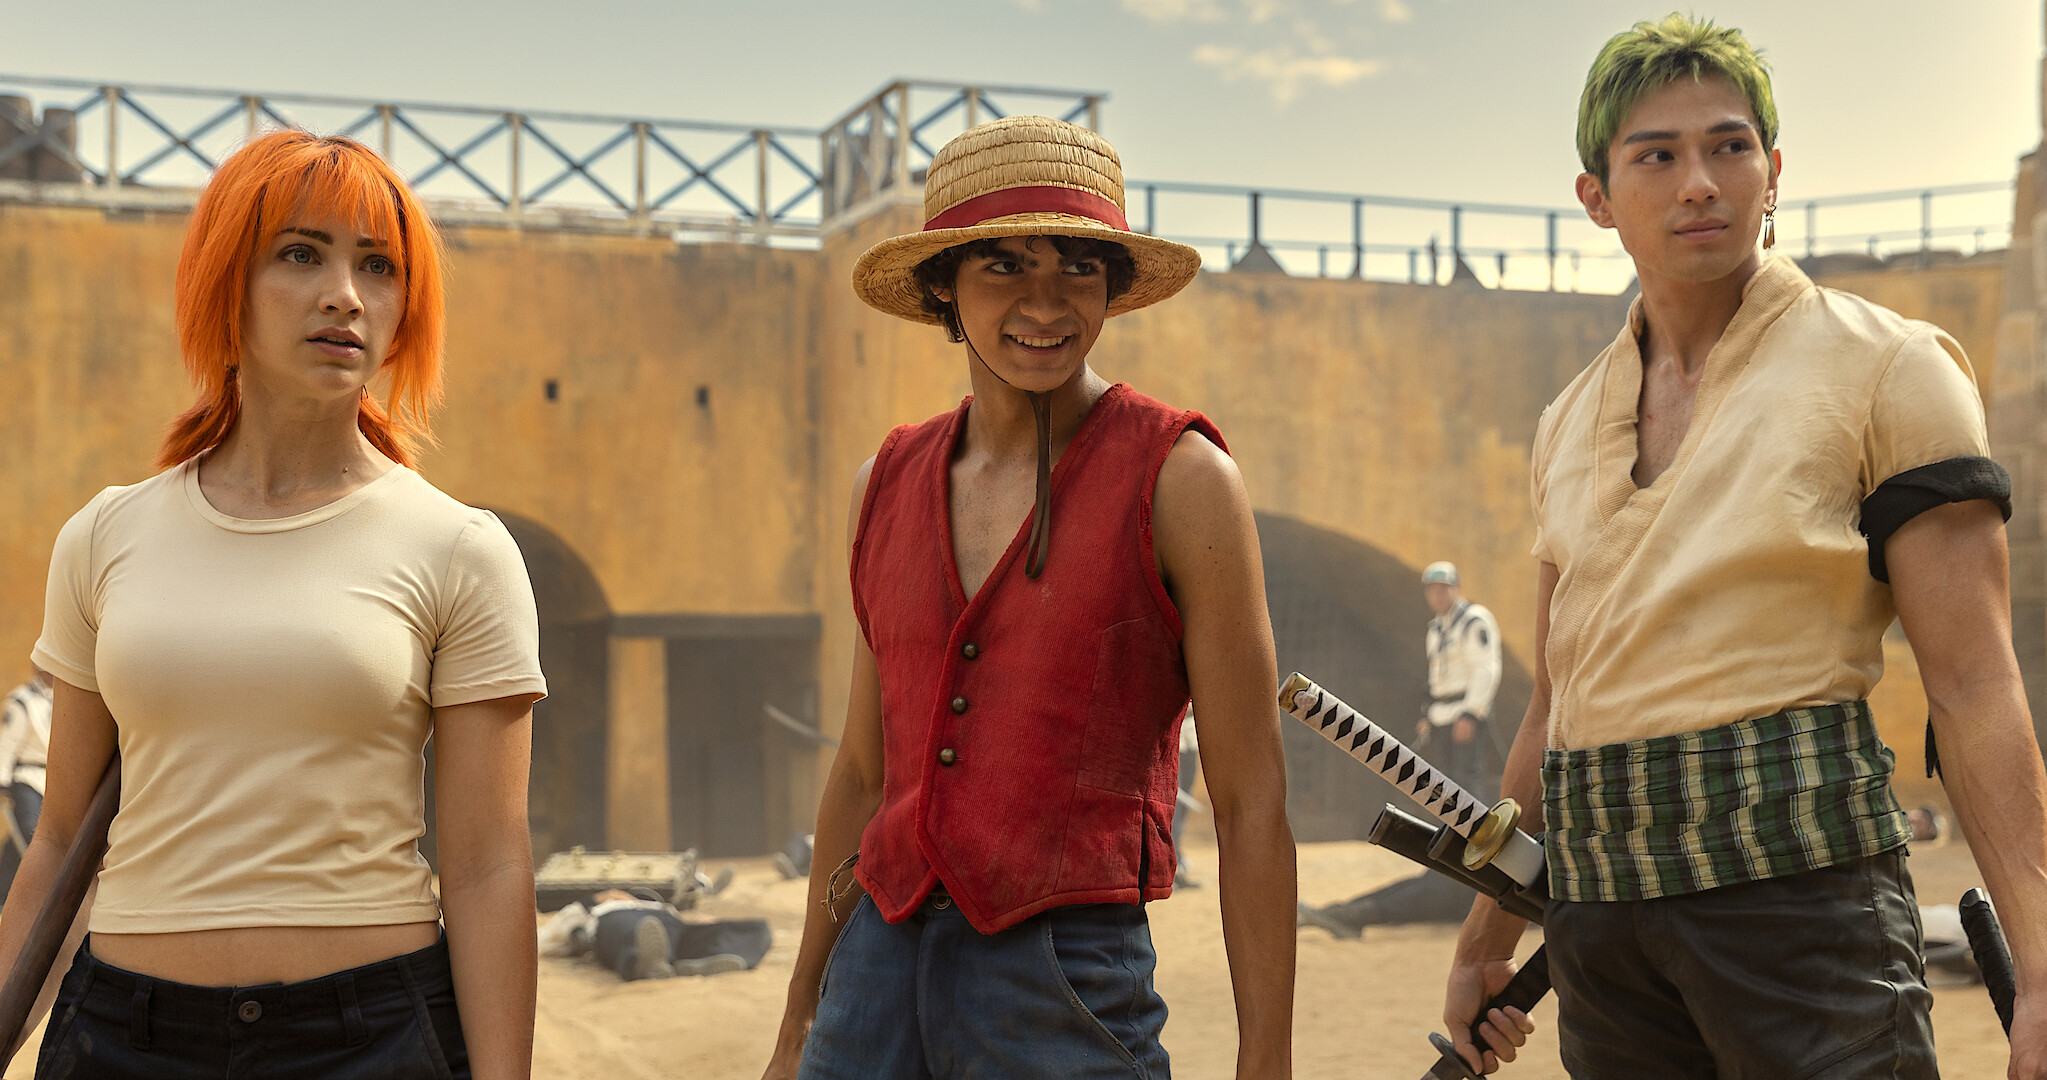 Meet the Cast of the ONE PIECE Live Action Series on Netflix pic